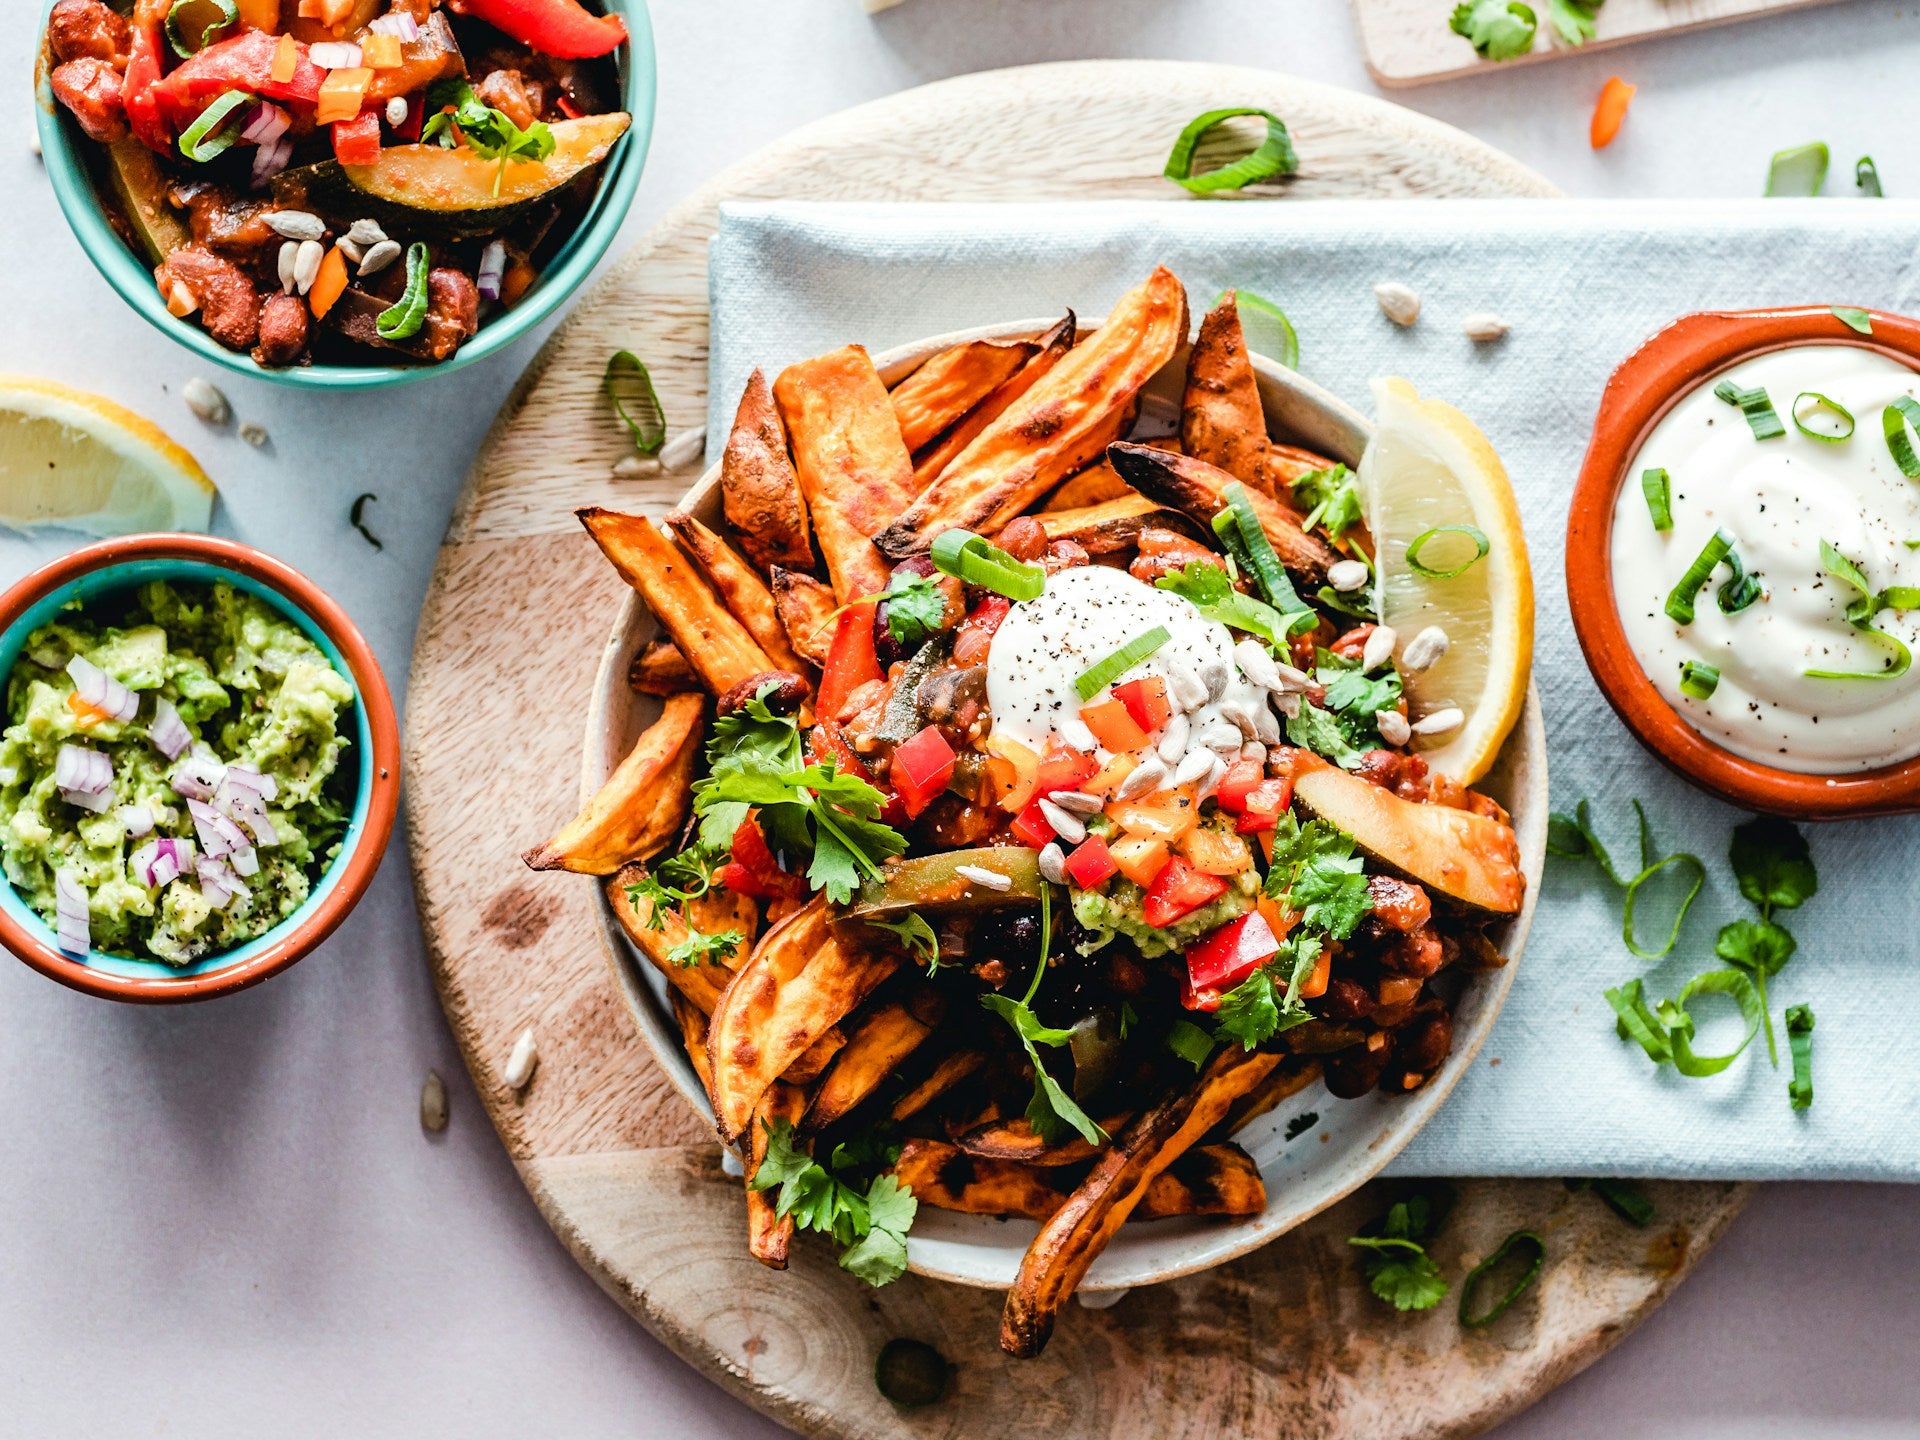 A vibrant flatlay image of a variety of plant-based dishes such as sweet potato fries, guacamole, and more